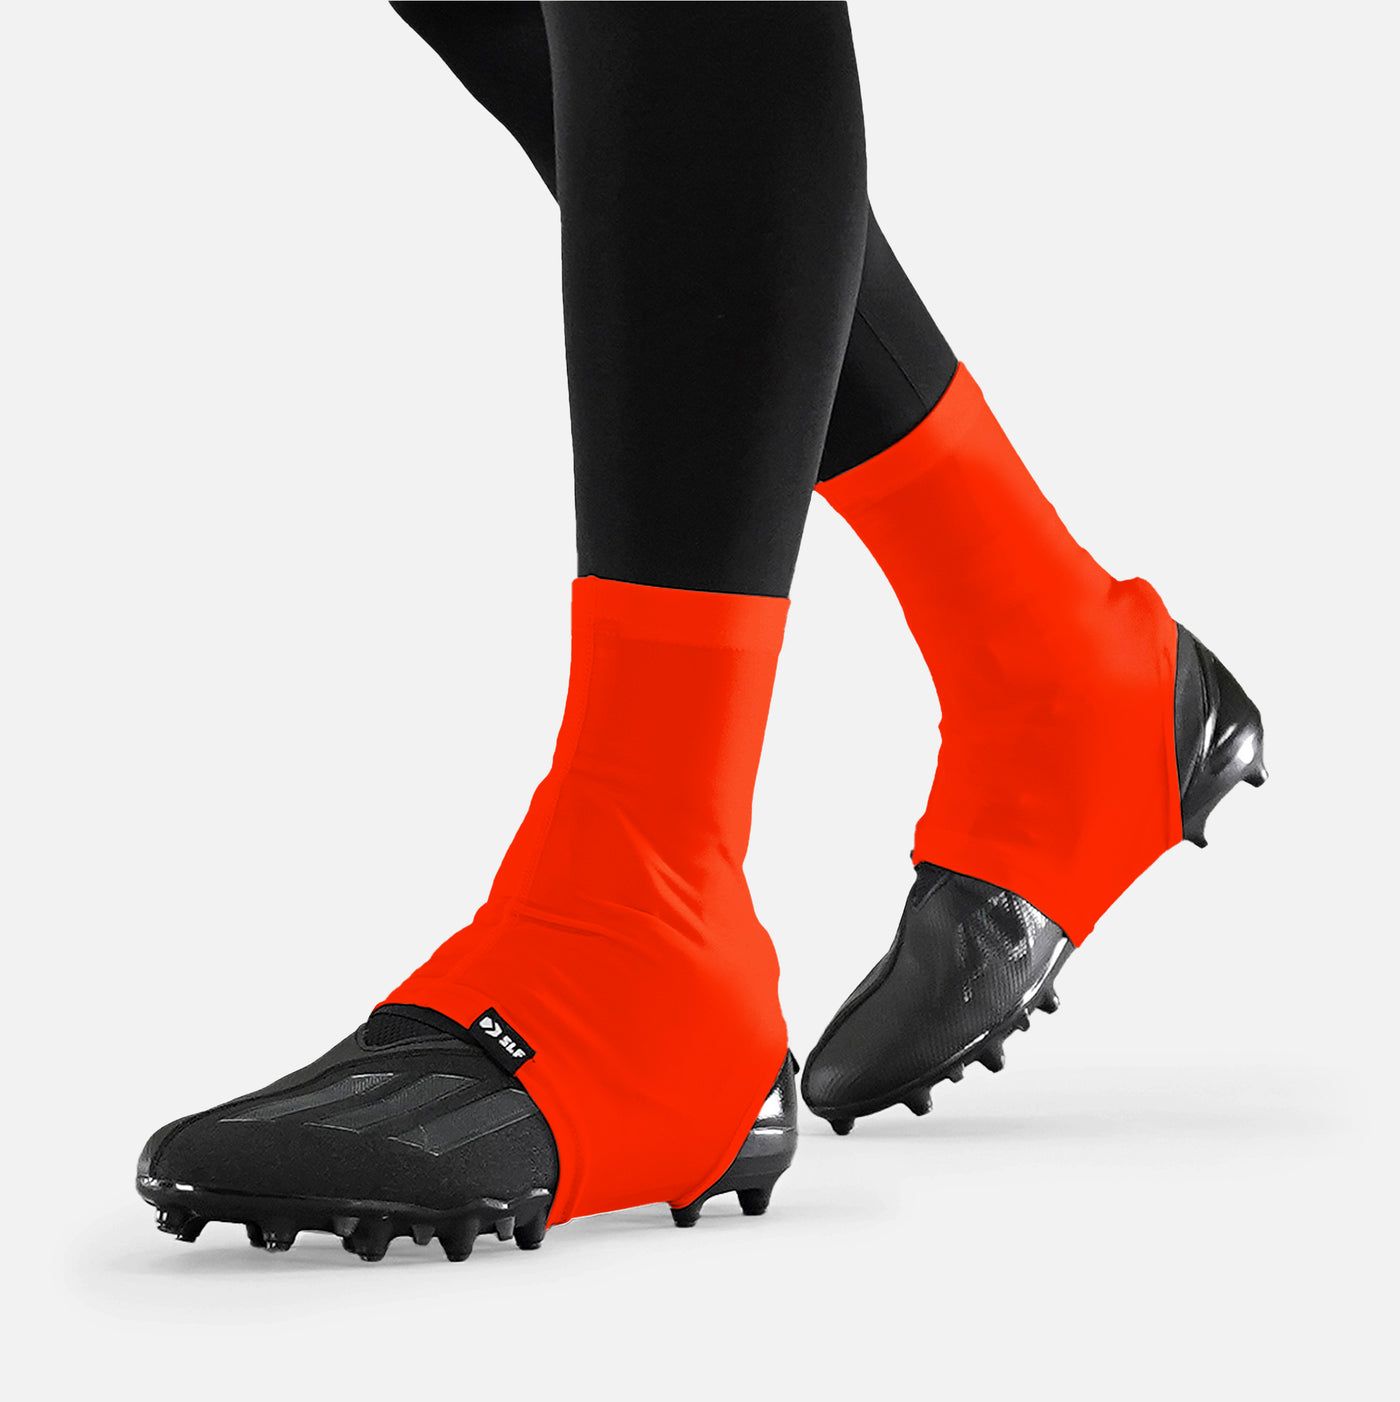 Hue Orange Spats / Cleat Covers